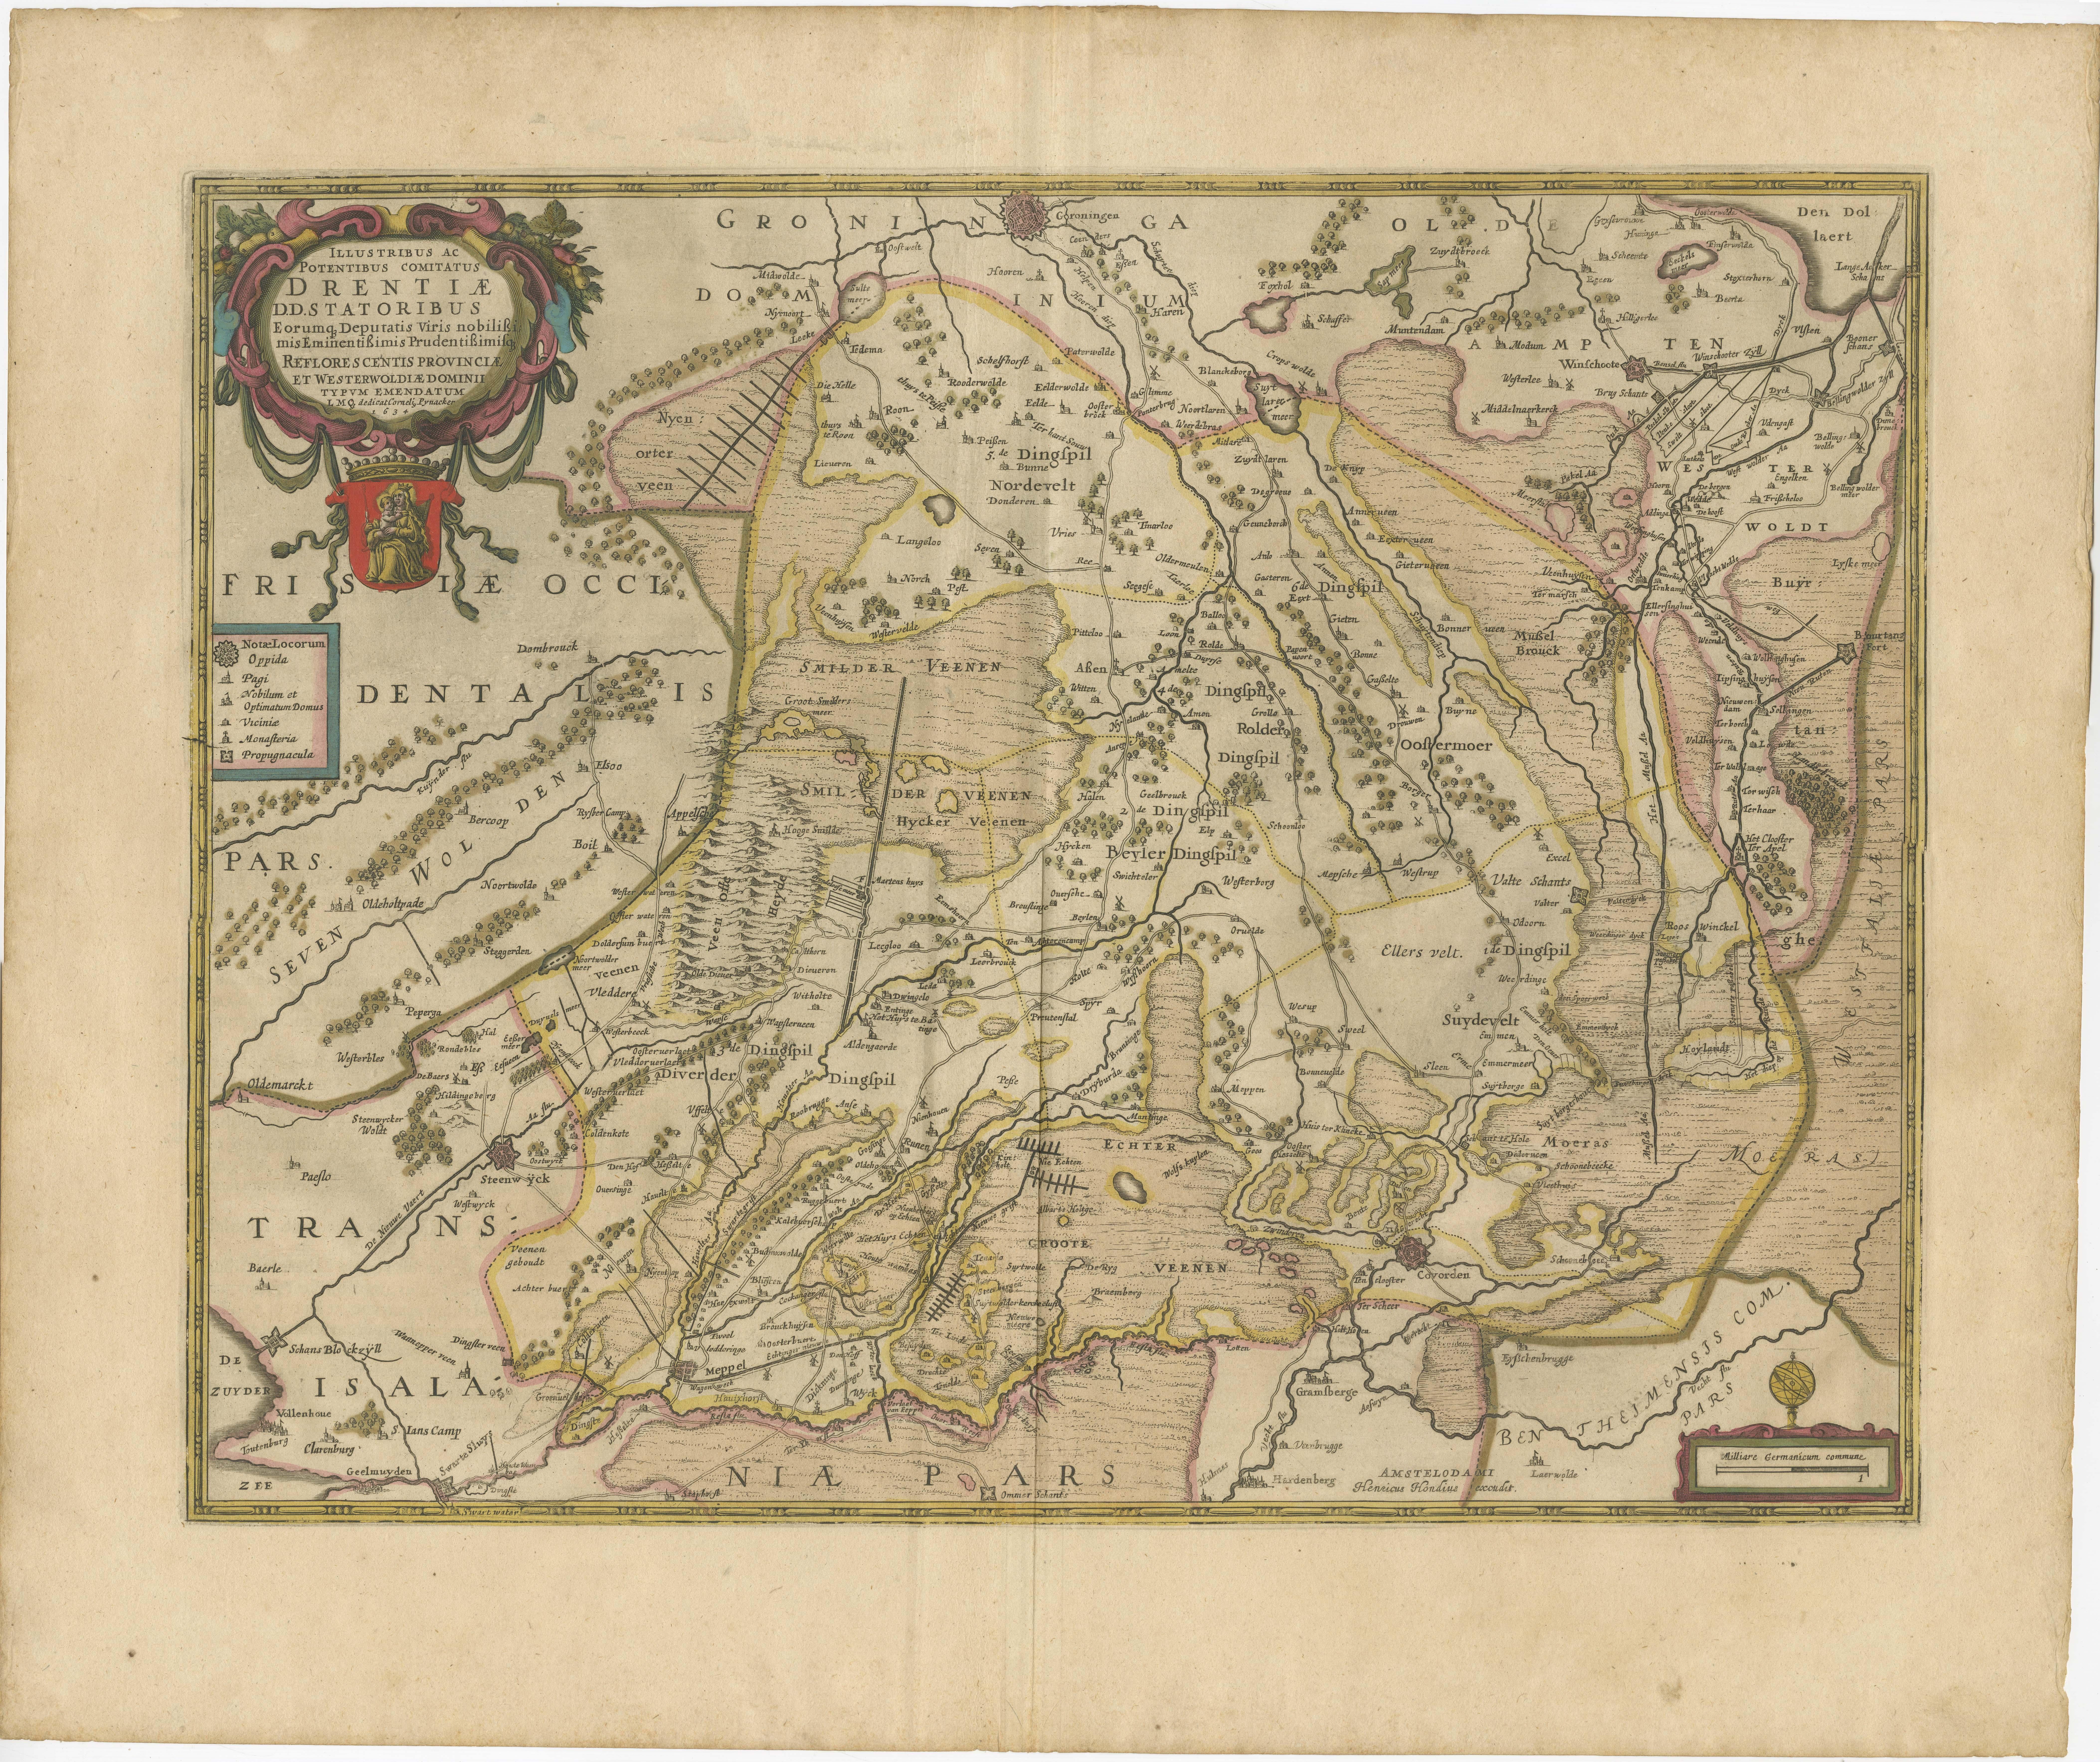 Original antique map titled 'Illustribus ac Potentibus Comitatus Drentiae (..)'. Old map of the province of Drenthe, the Netherlands. Published by H. Hondius circa 1639. 

Hendrik Hondius was a Flemish-born and trained engraver, cartographer, and